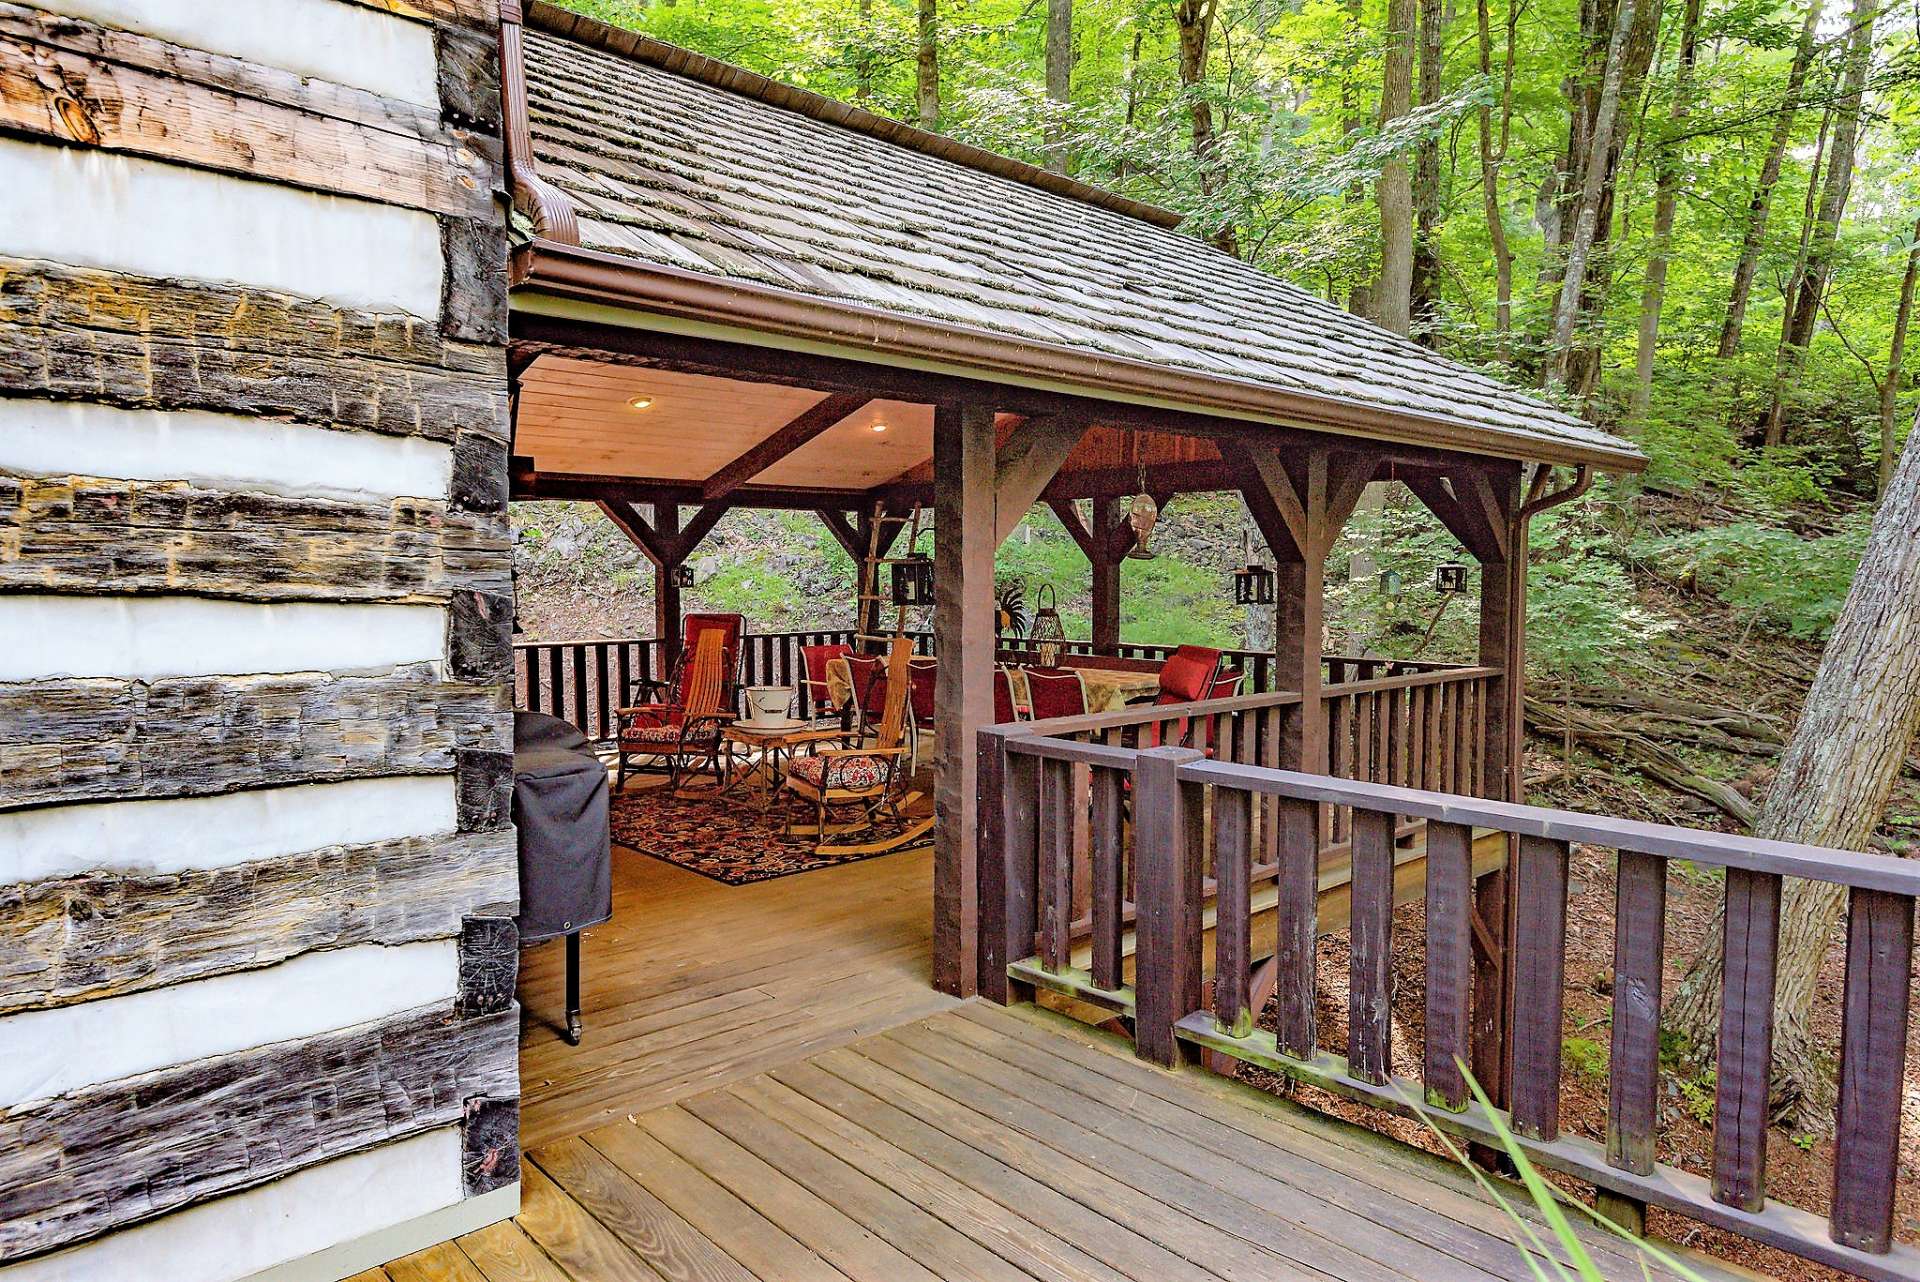 Just around the corner is the cabin's prime entertaining area.